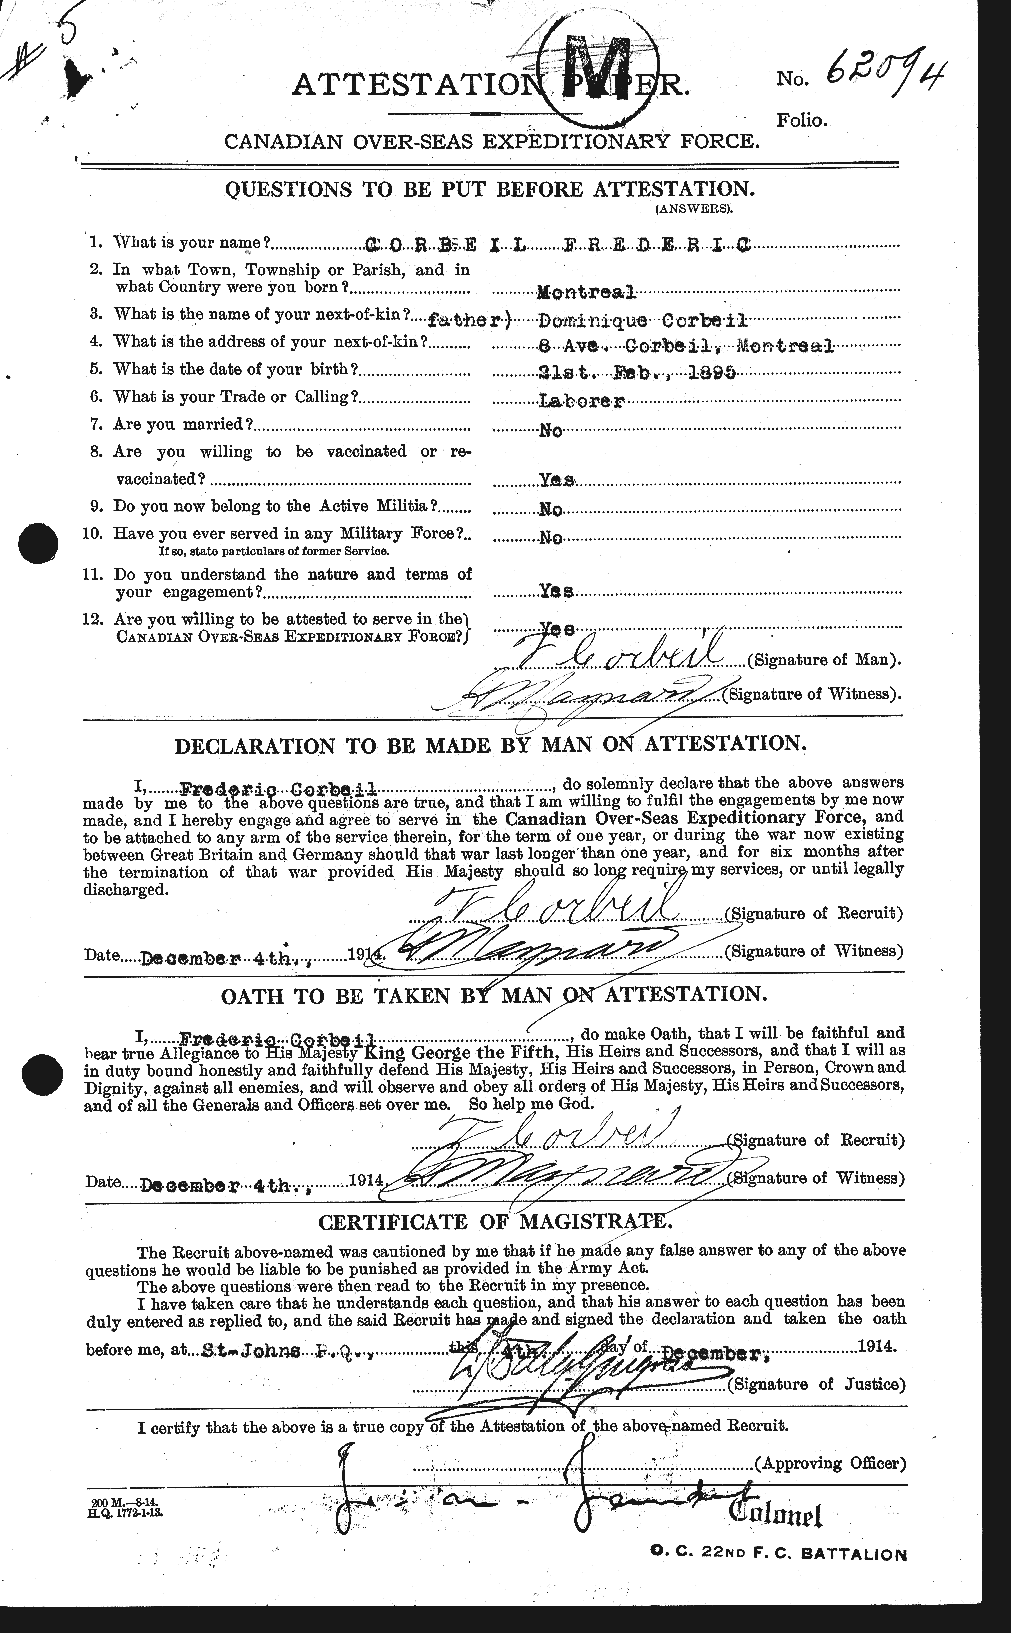 Personnel Records of the First World War - CEF 055428a